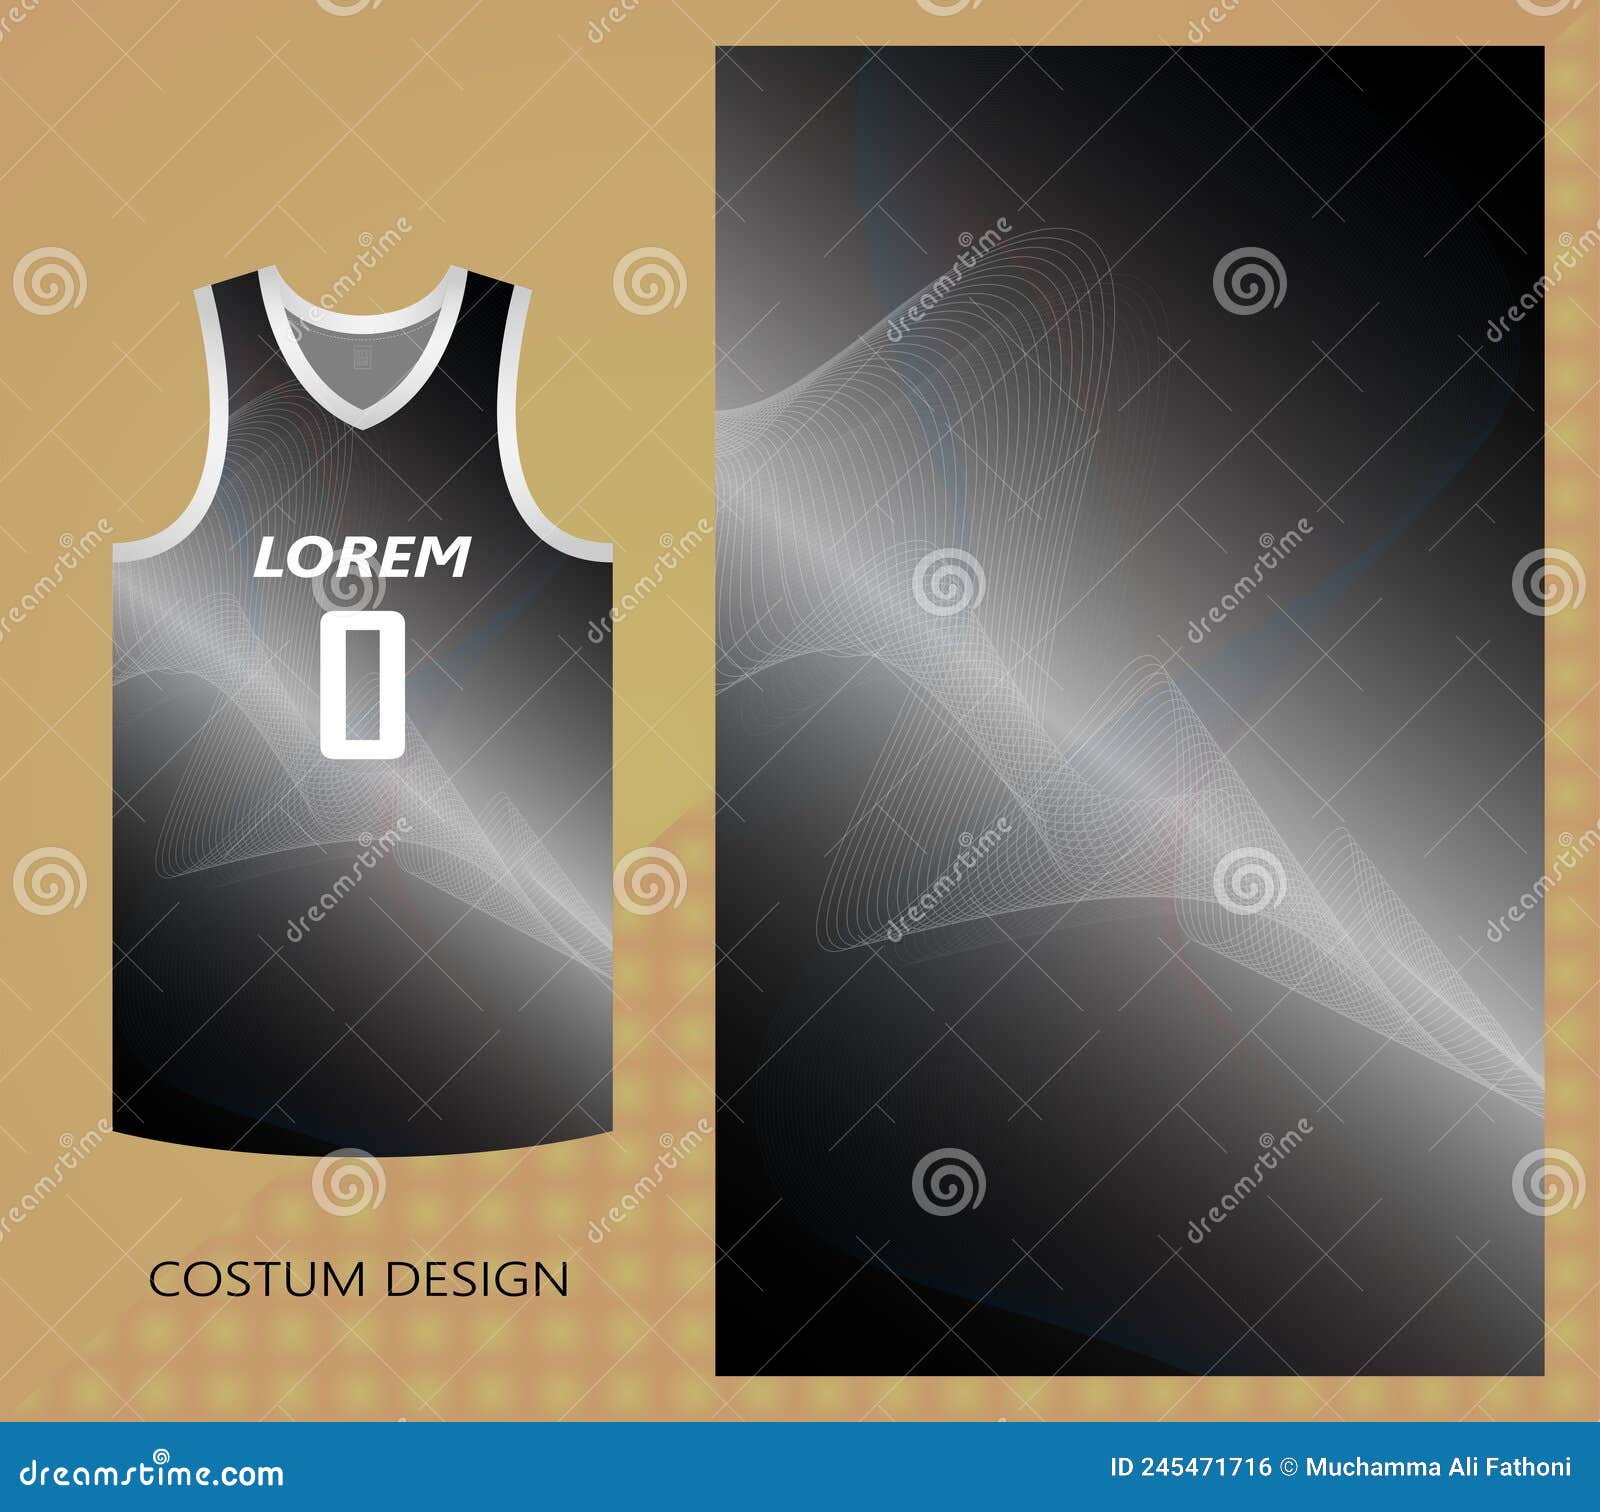 layout basketball jersey design black and gold